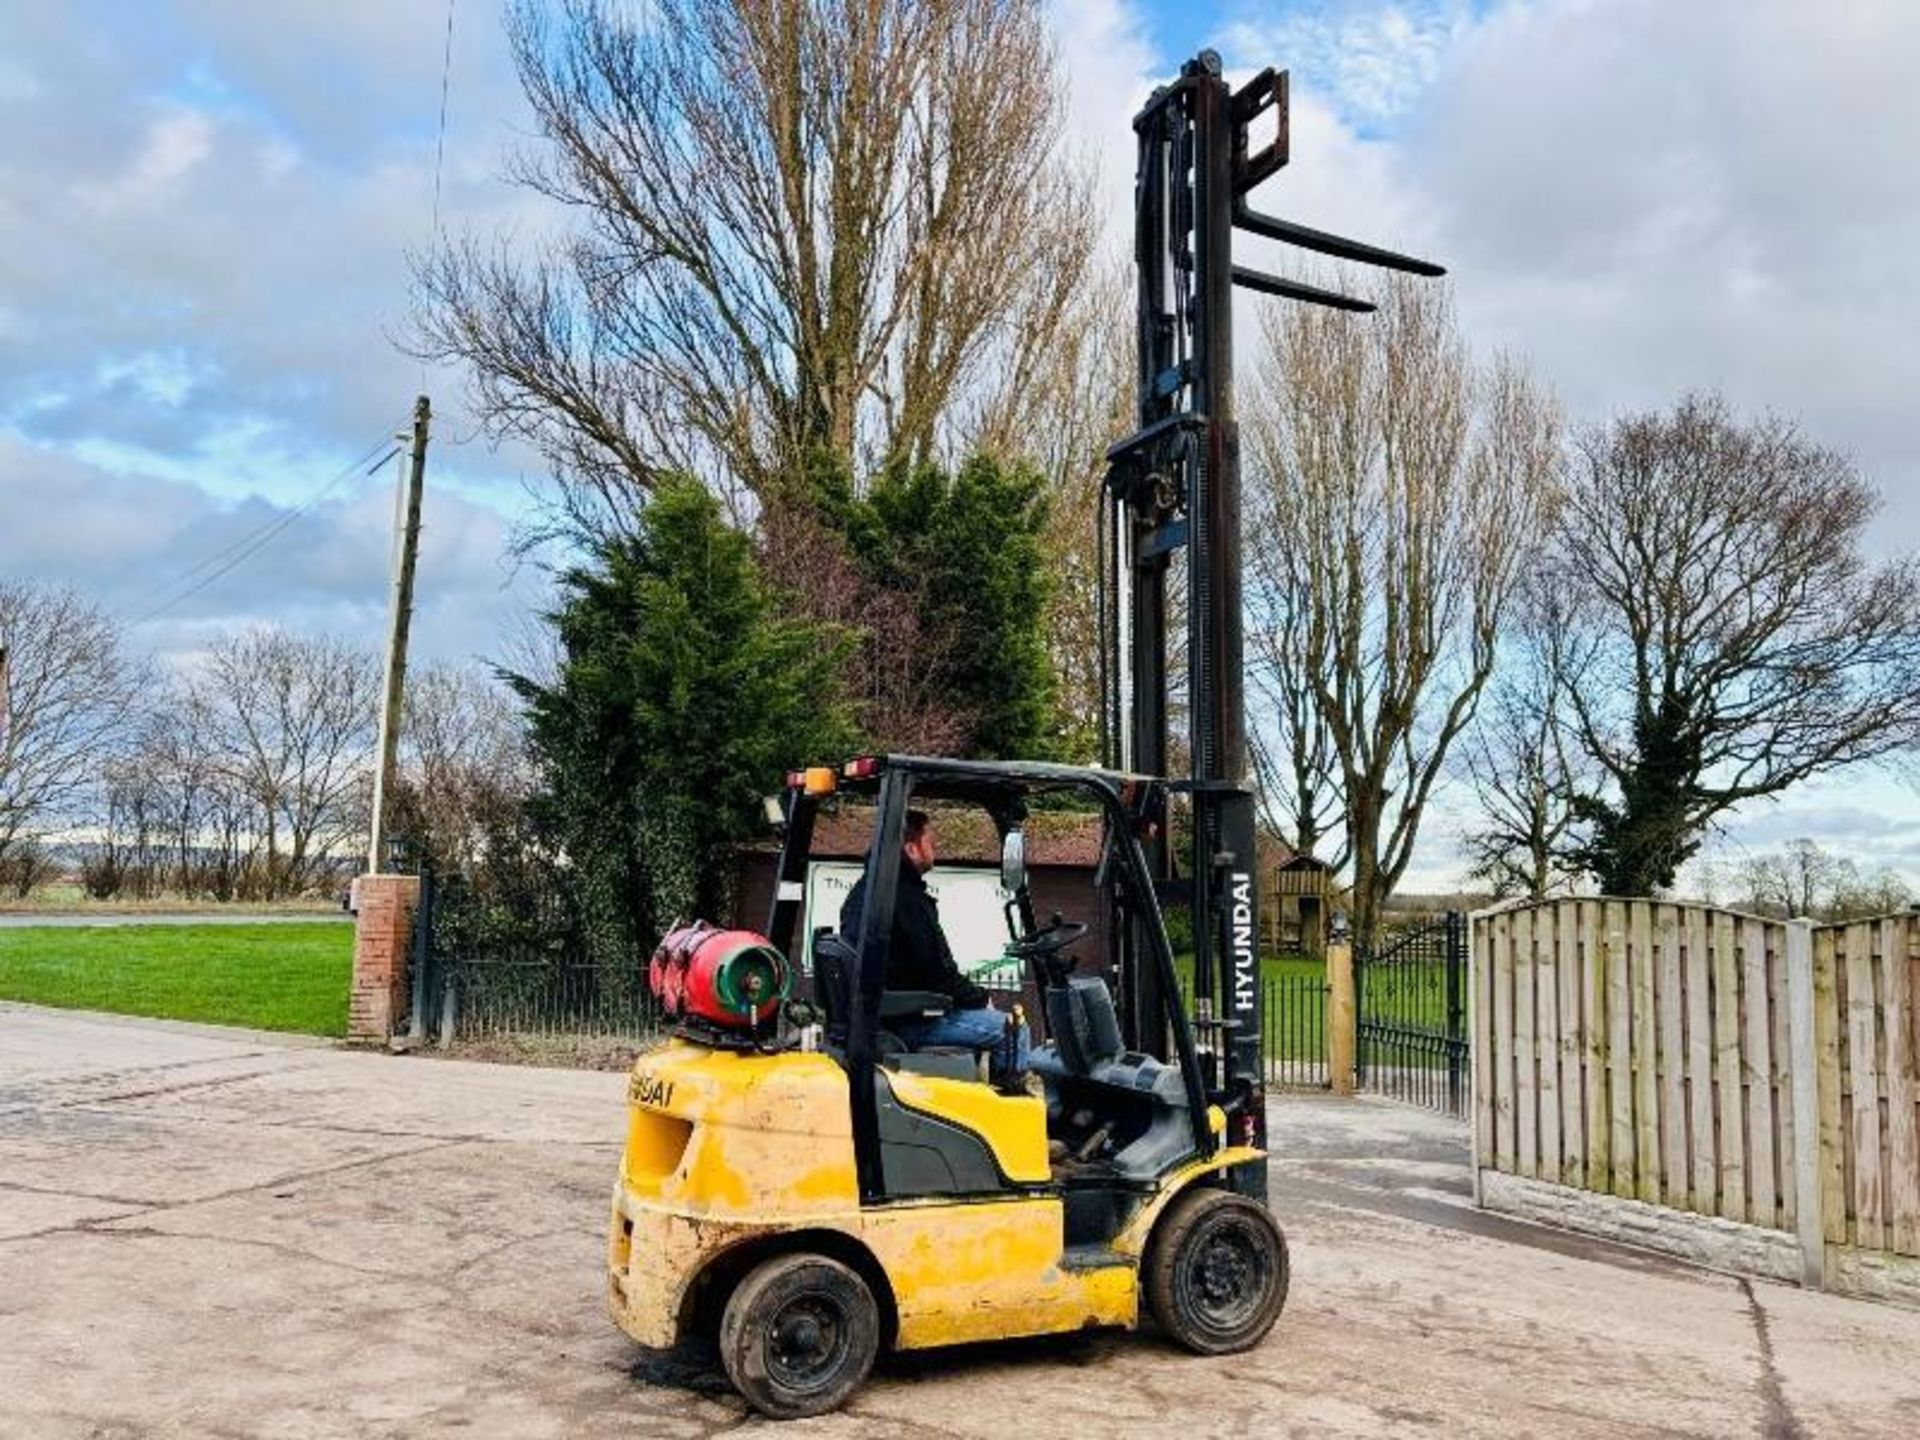 HYUNDAI 25L-7A CONTAINER SPEC FORKLIFT *YEAR 2017* C/W PALLET TINES - Image 5 of 14